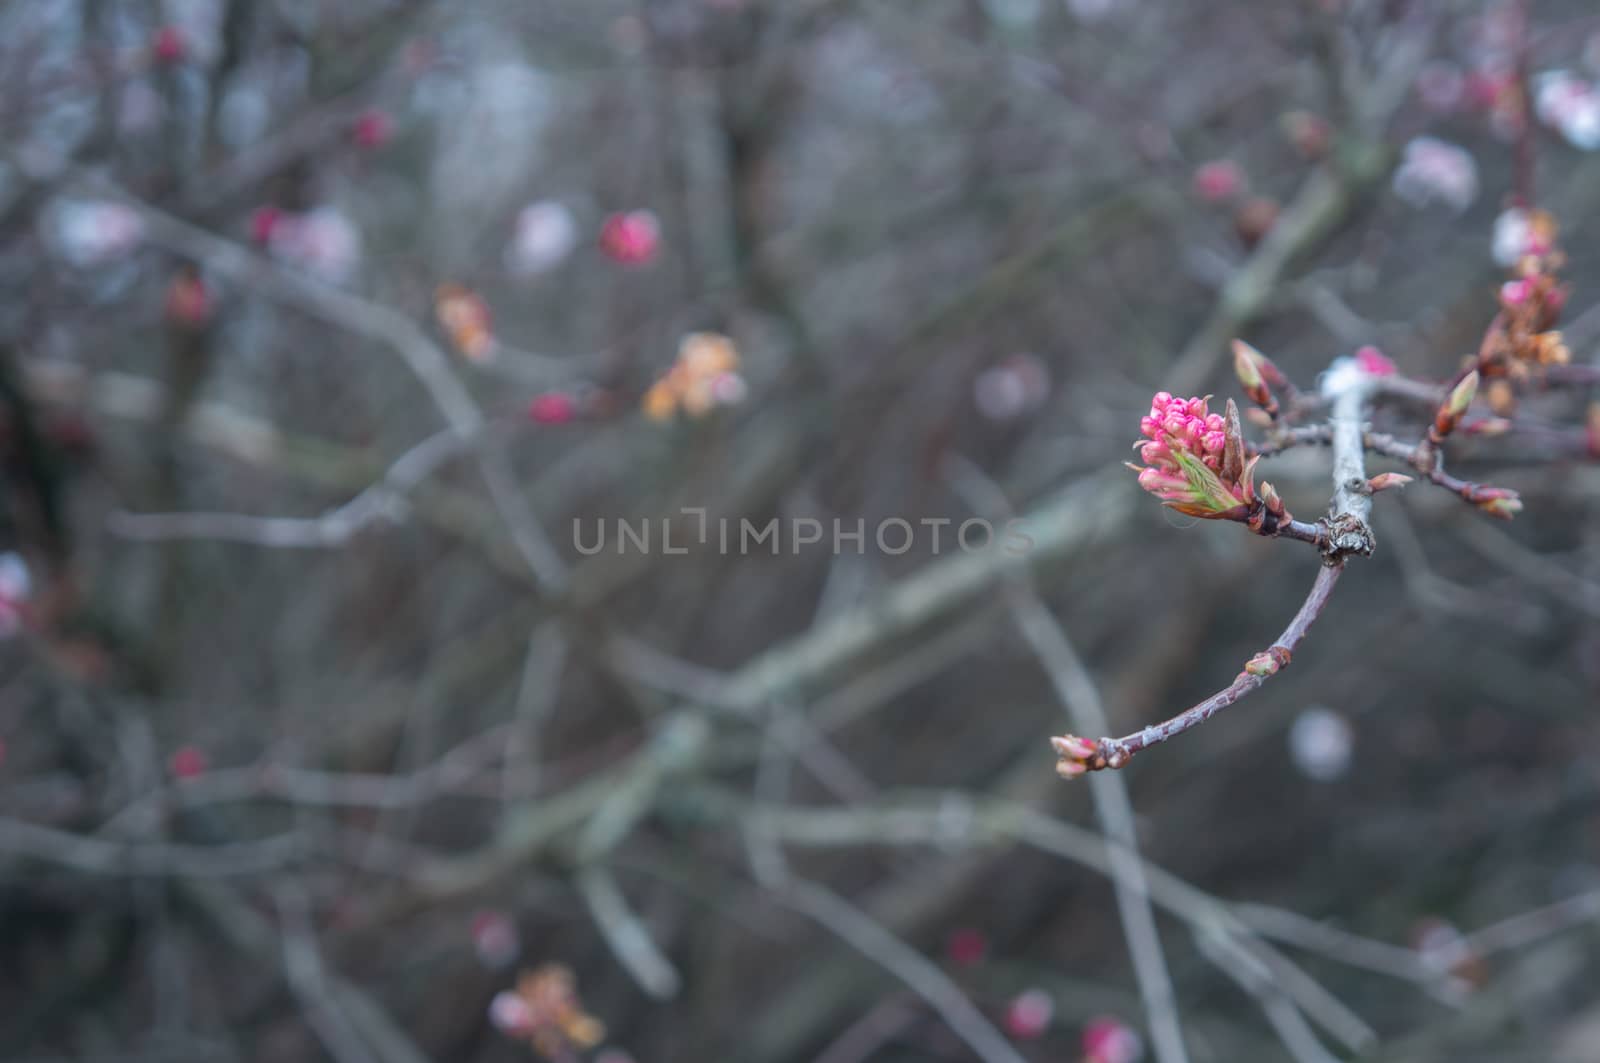 Cool toned close up of deep pink flower buds on a brach off center. Blurred tangled branches in the background. Romantic and crisp theme